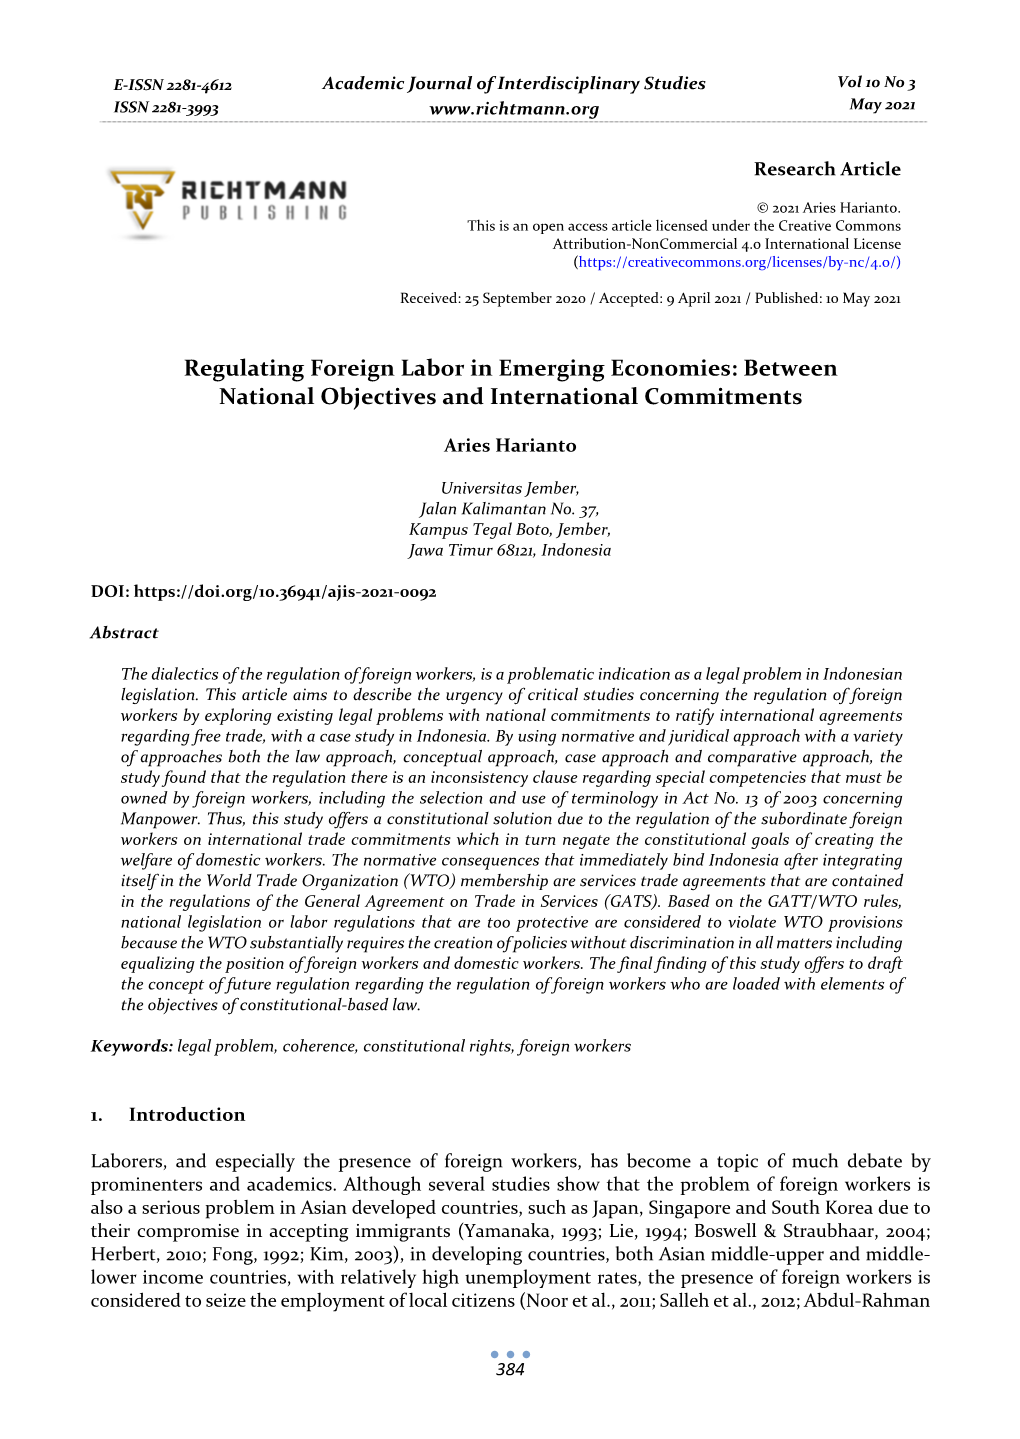 Regulating Foreign Labor in Emerging Economies: Between National Objectives and International Commitments